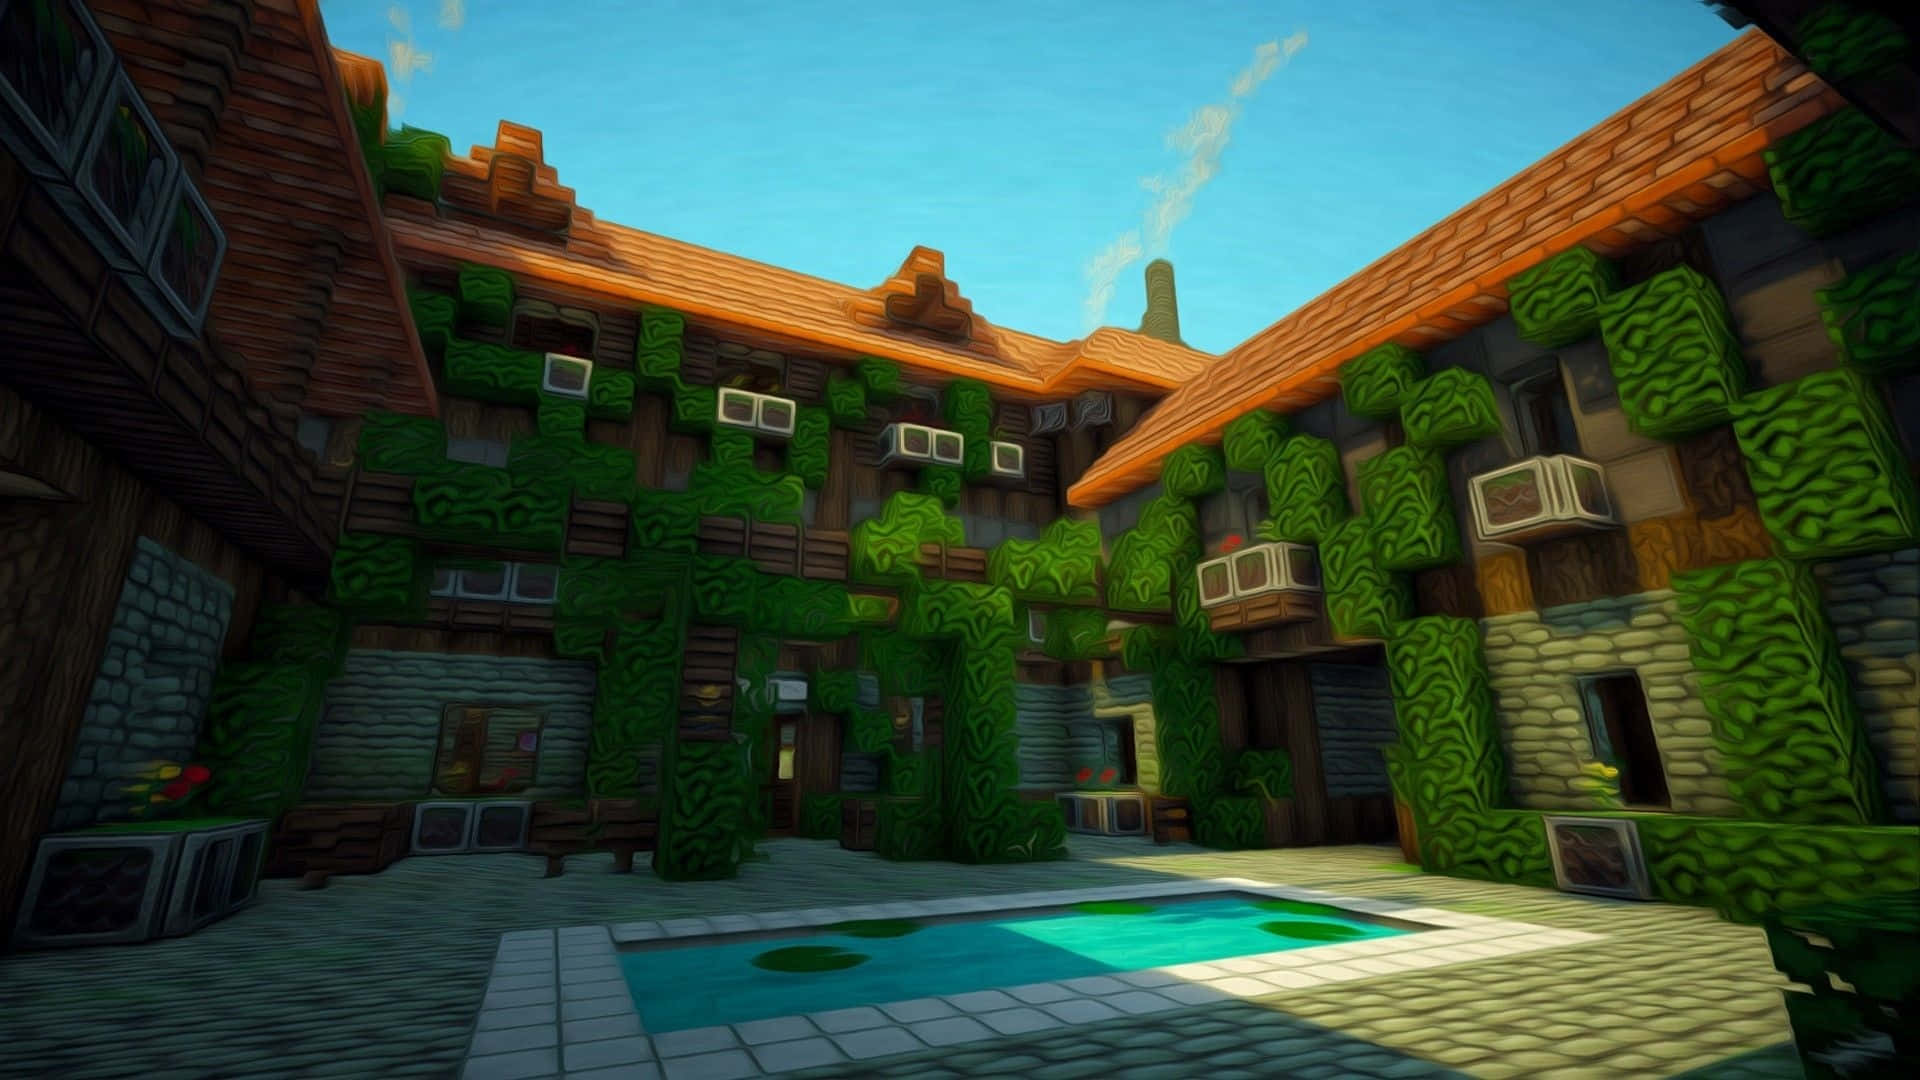 Explore the magical Minecraft world and build spectacular houses.